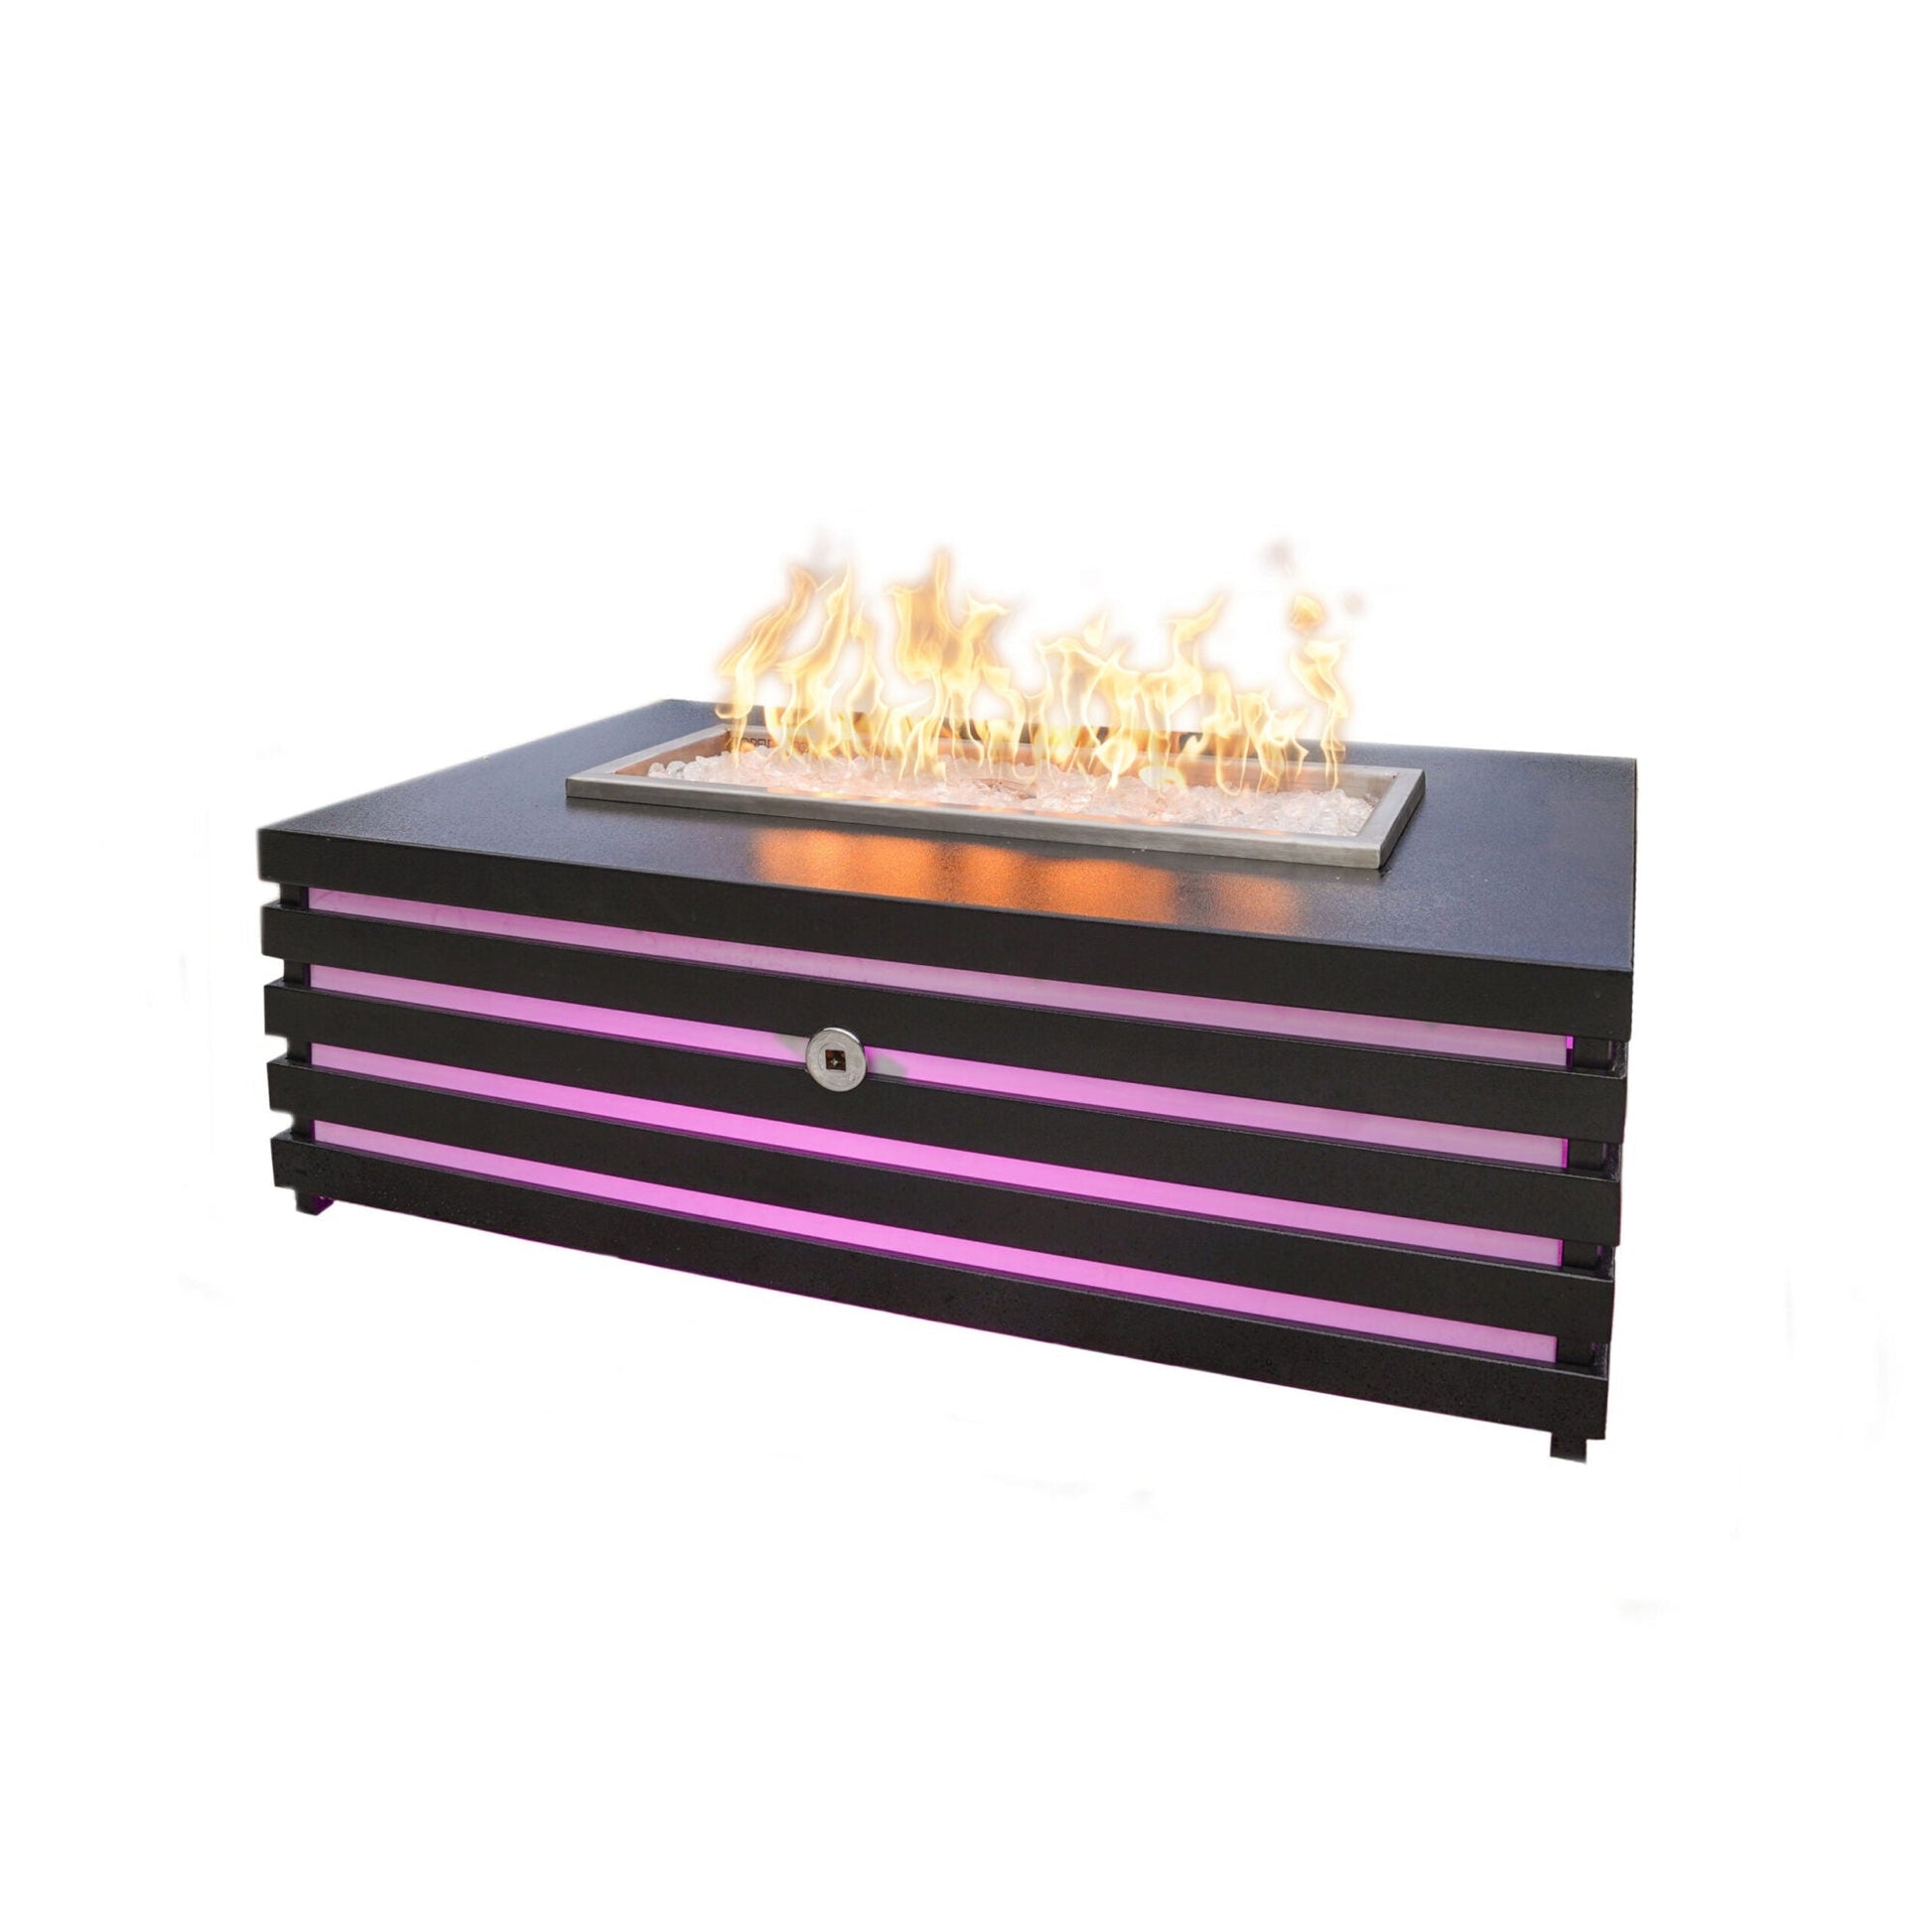 The Outdoor Plus Amina 48" Black Powder Coated Liquid Propane Fire Pit with 12V Electronic Ignition